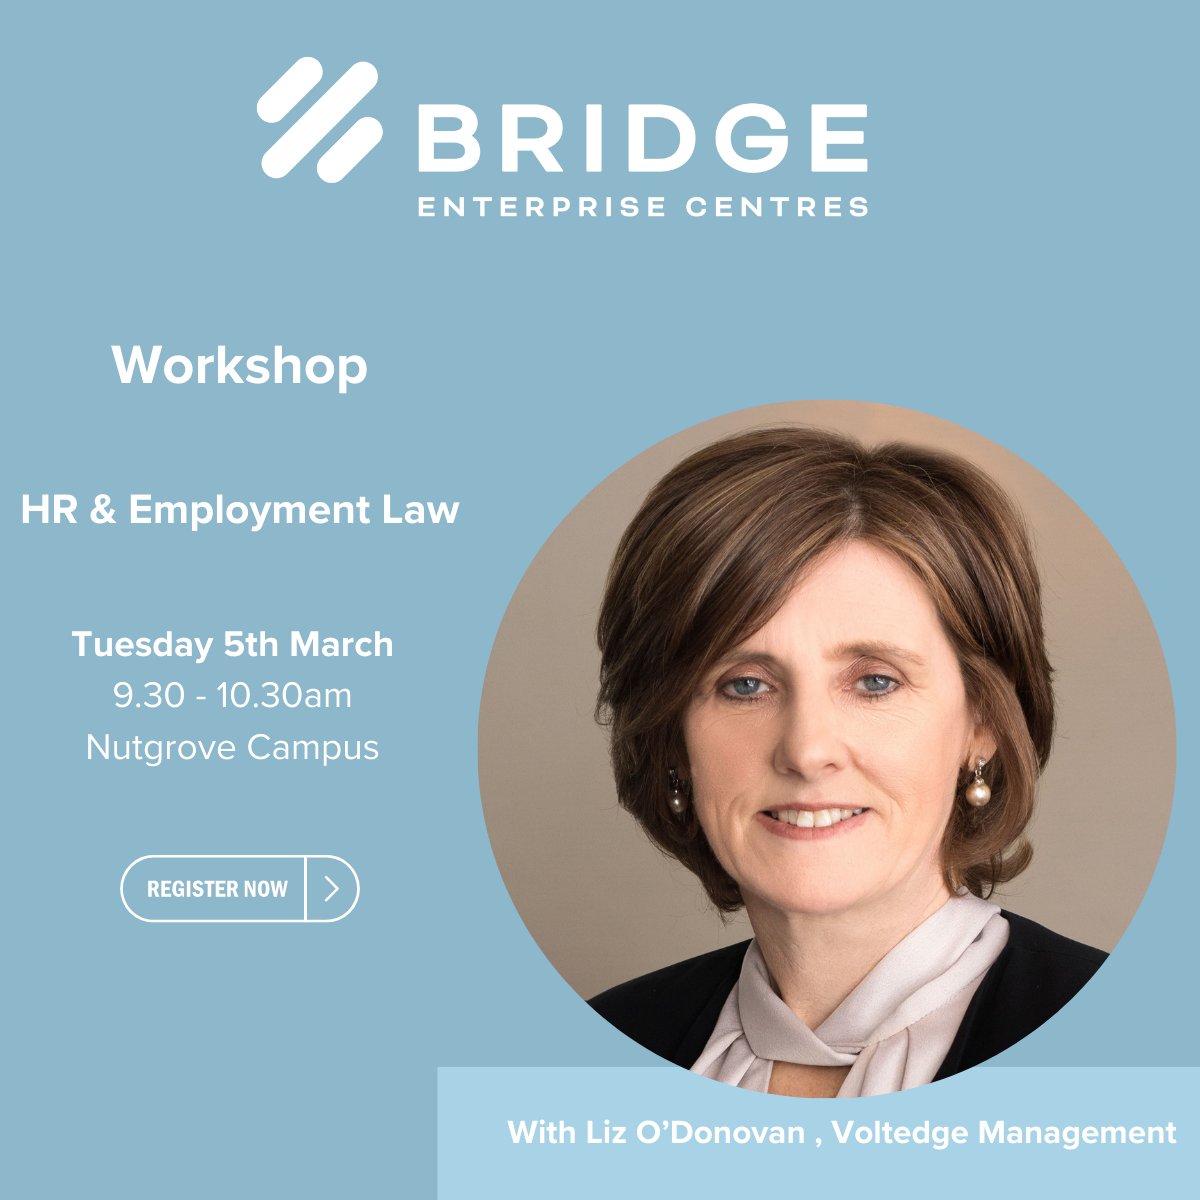 Workshop: Tuesday 5th of March, 9.30am – 10.30am. Liz O'Donovan, Senior HR Business Consultant at Voltedge Management. 
For more information and to register to attend contact Brian Kelly, brian@bridgeec.ie or call 01 494 8400.

#employmentlaw #hrstratergy #localenterpriseweek